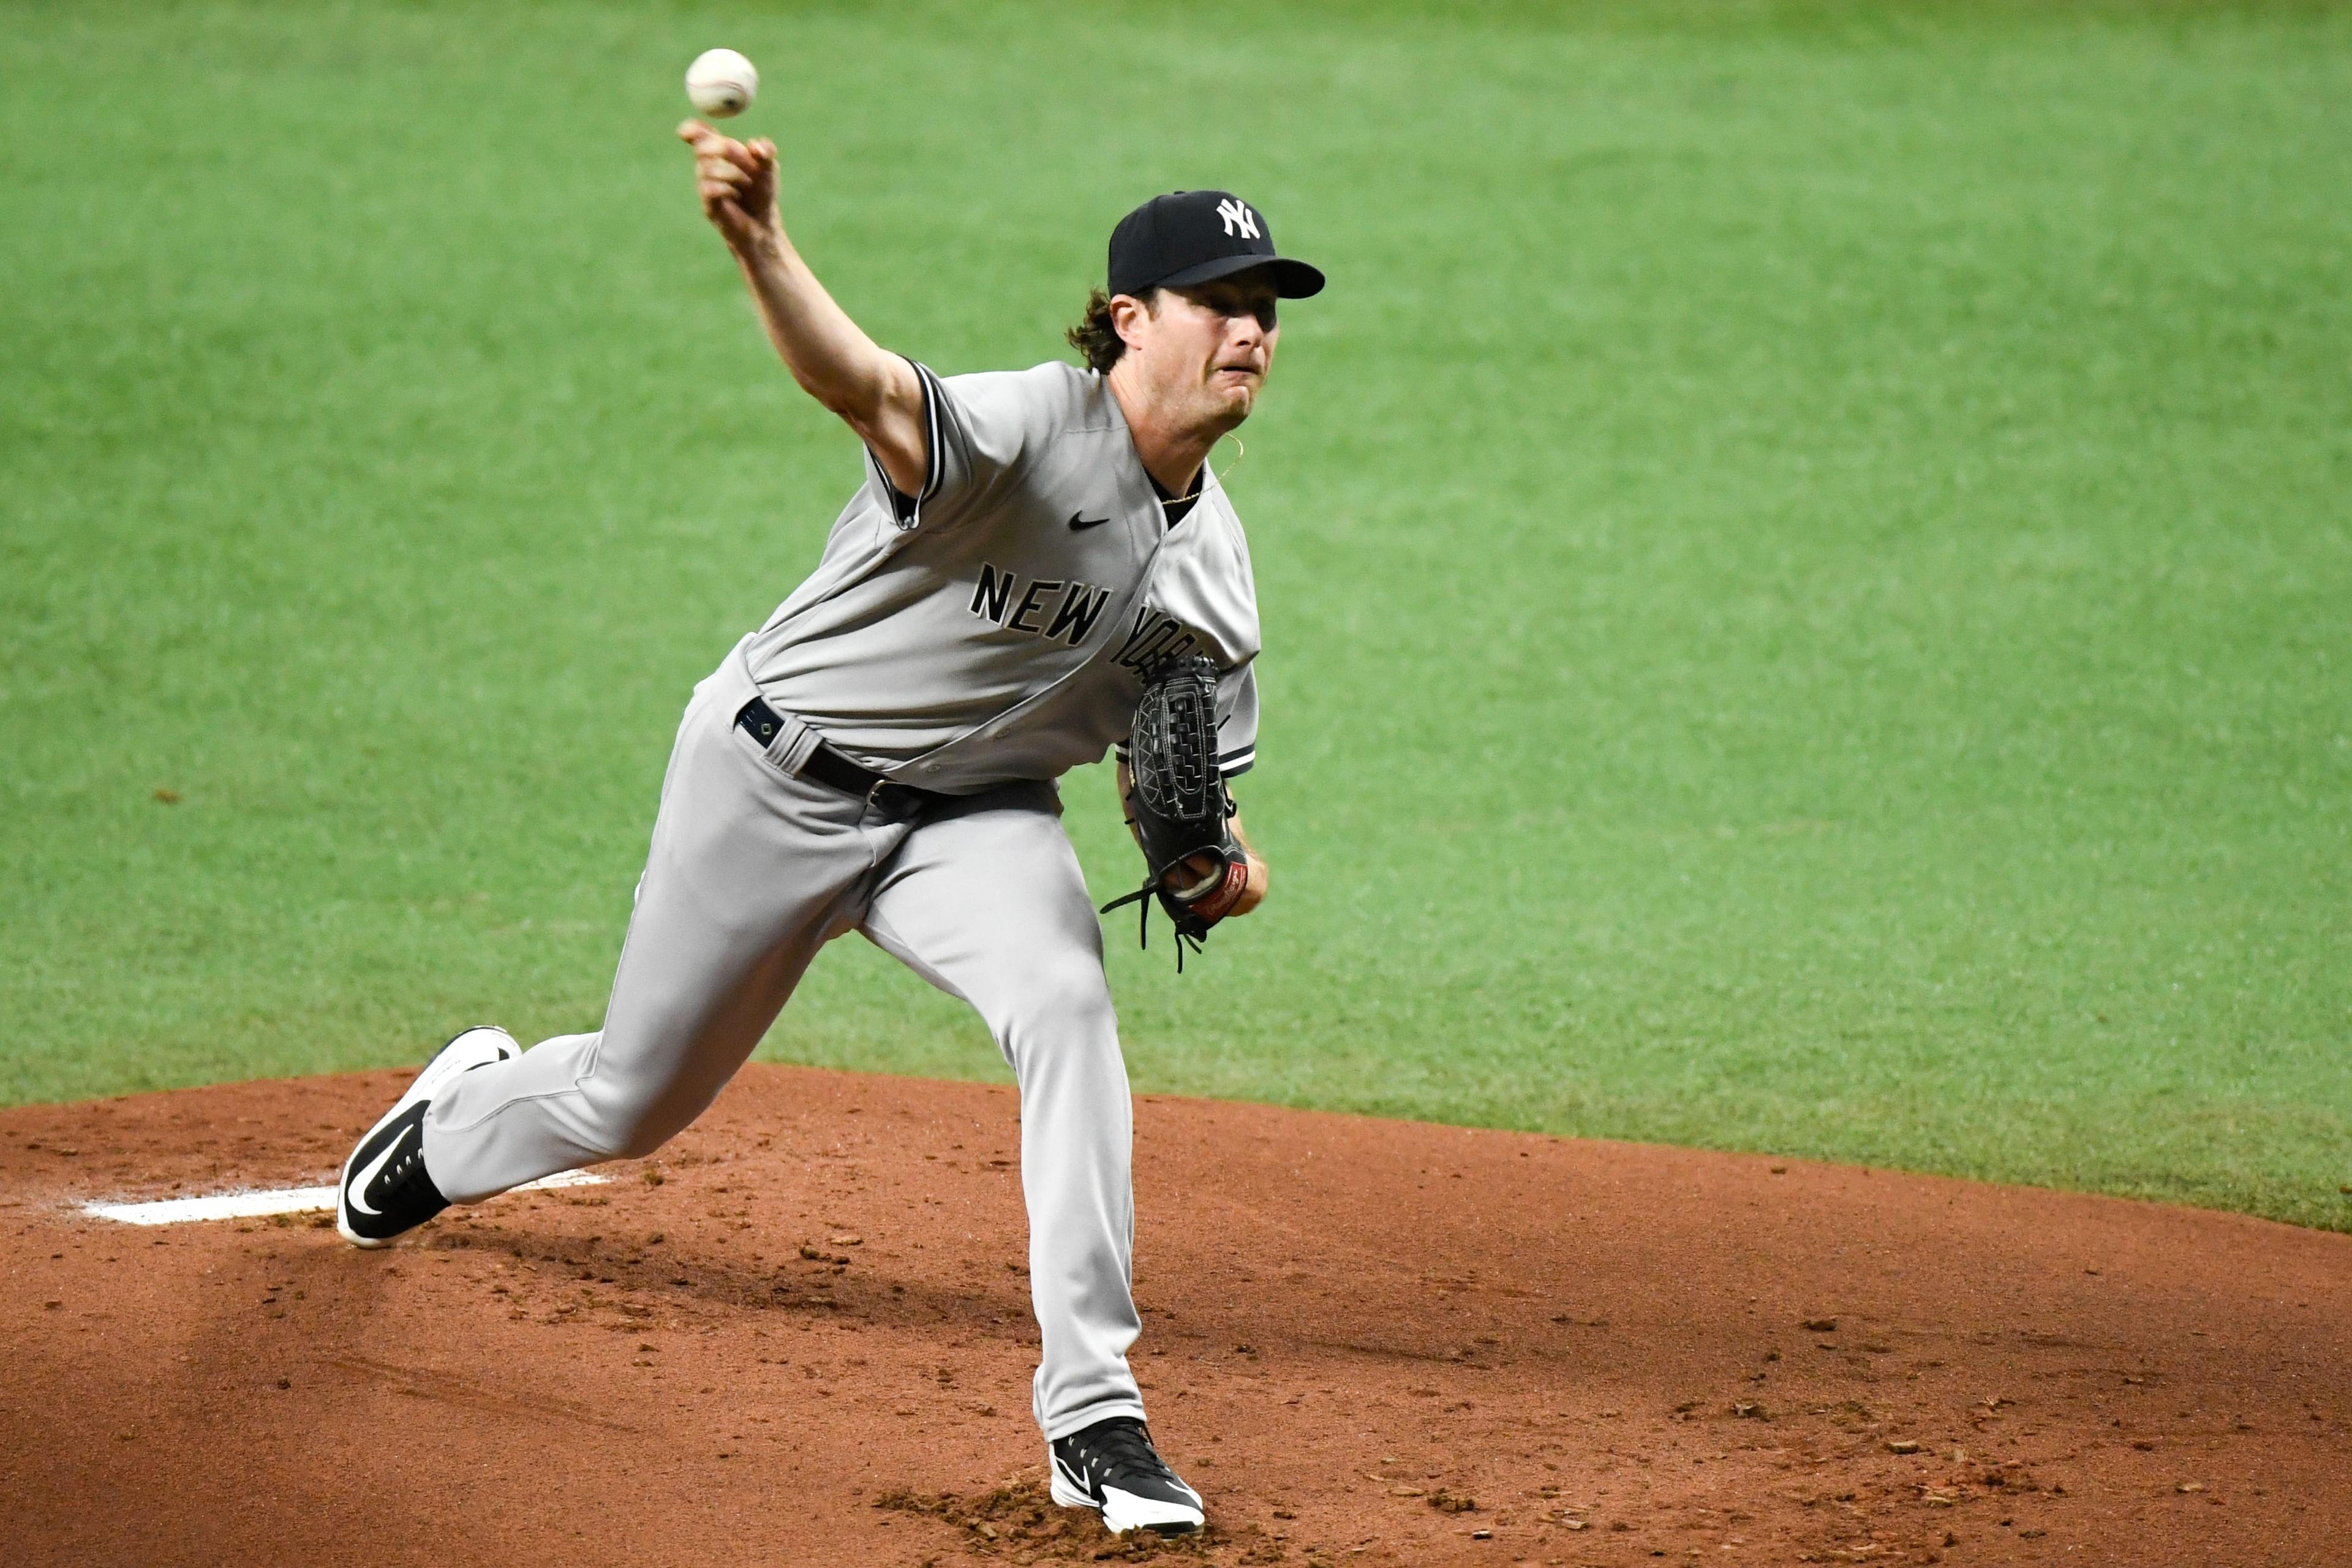 New York Yankees starting pitcher Gerrit Cole (45) throws a pitch during the first inning against the Tampa Bay Rays of the Tampa Bay Rays at Tropicana Field. / Douglas DeFelice-USA TODAY Sports